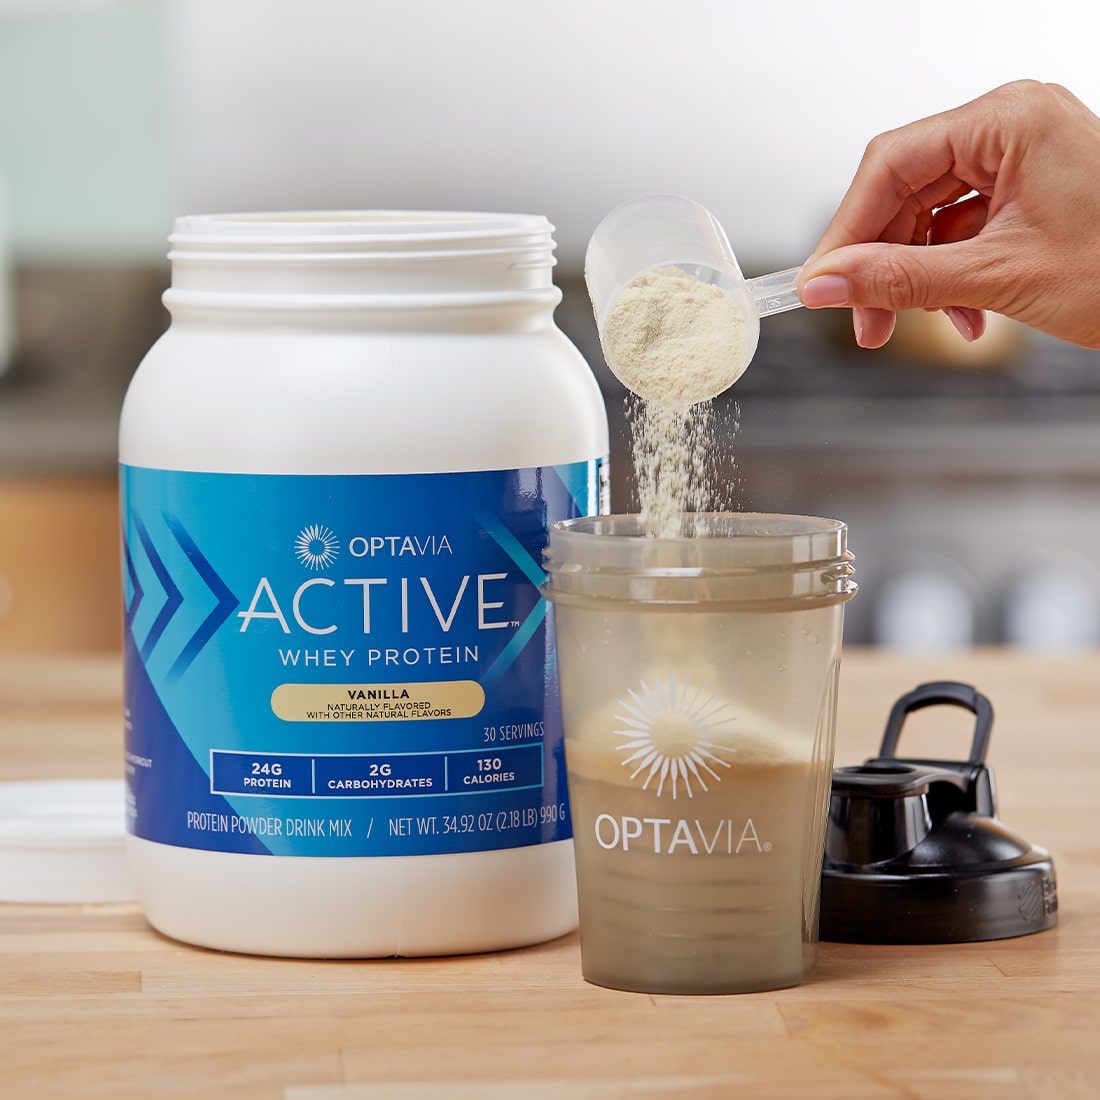 Hand adding a scoop of Optavia Active Whey Protein Blend, Vanilla to a blenderbottle.